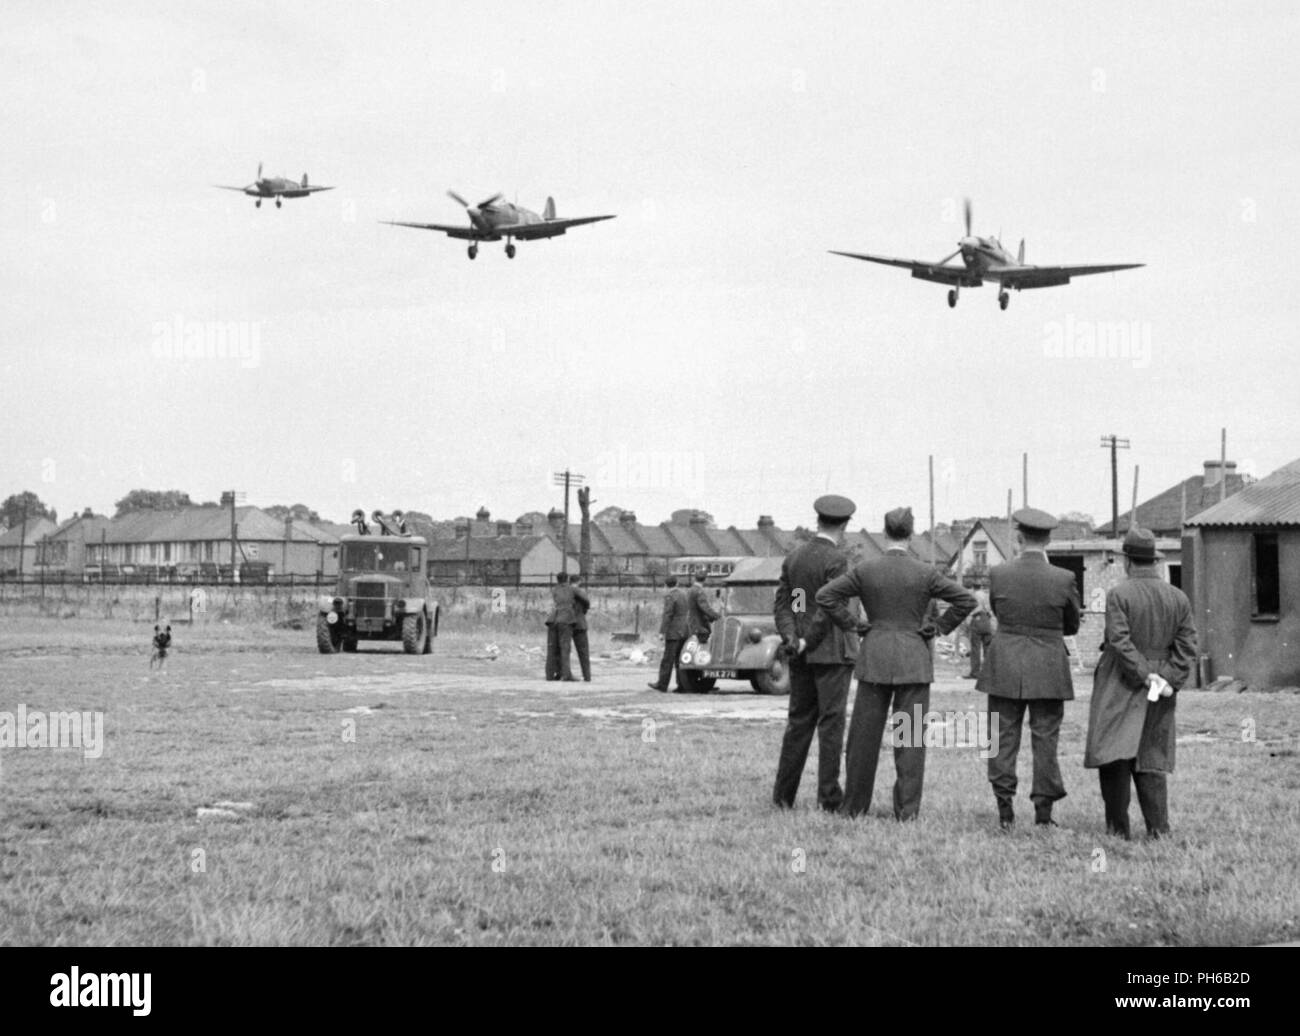 Personnel of No.121 (Eagle) Squadron look on as three Supermarine Spitfire aircraft land after a fighter sweep over northern France at Royal Air Force Rochford in Essex, England August 1942. Some of the accommodation used by the squadron is visible in the background, as are several civilian houses and two RAF vehicles. Stock Photo